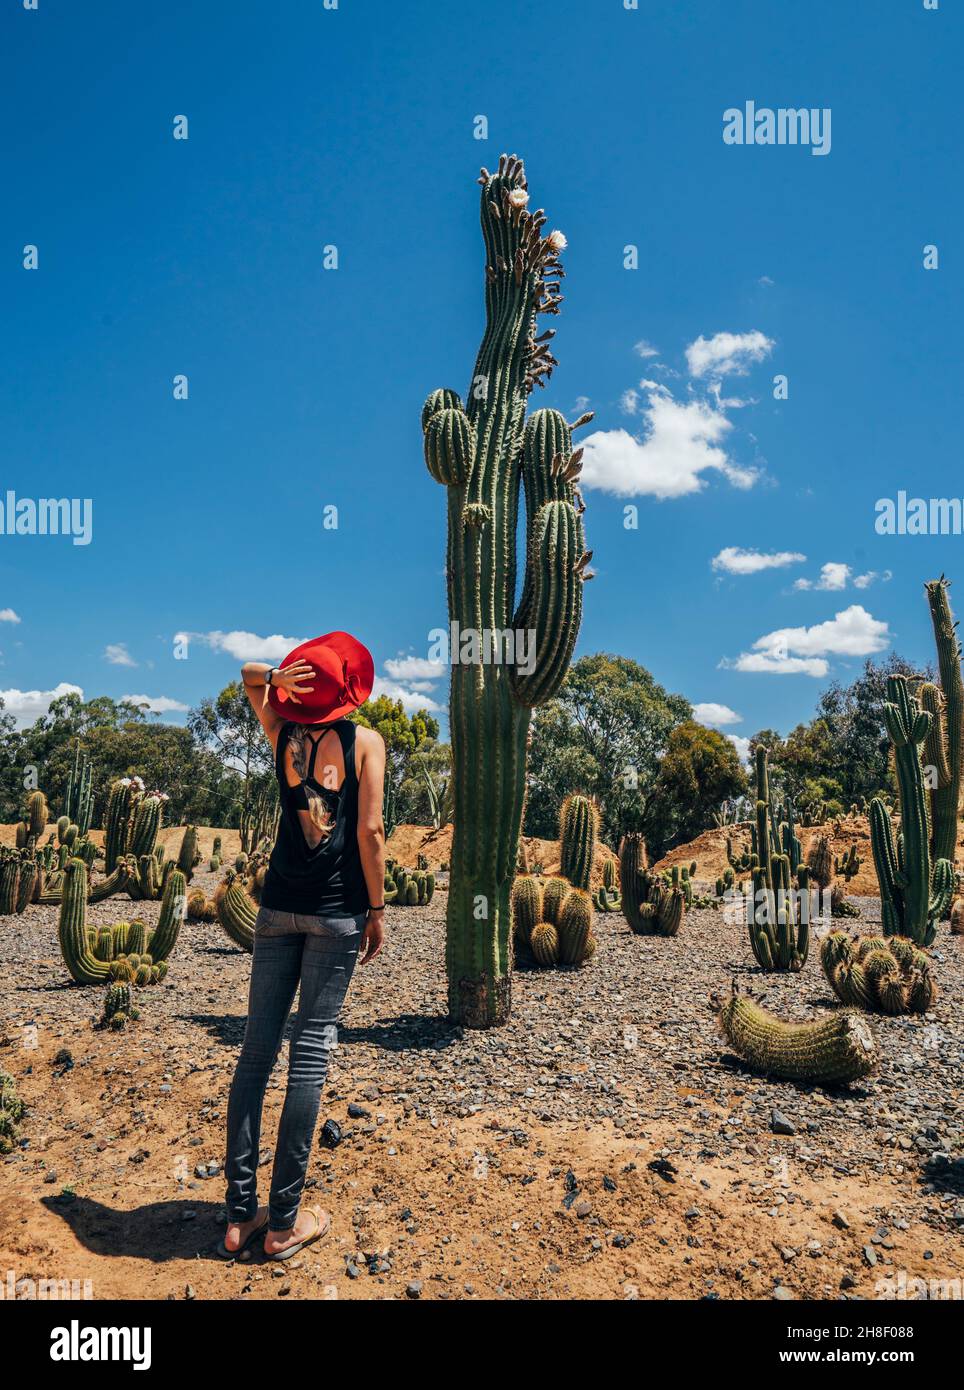 Woman looking up at tall cactus in desert, Australia Stock Photo